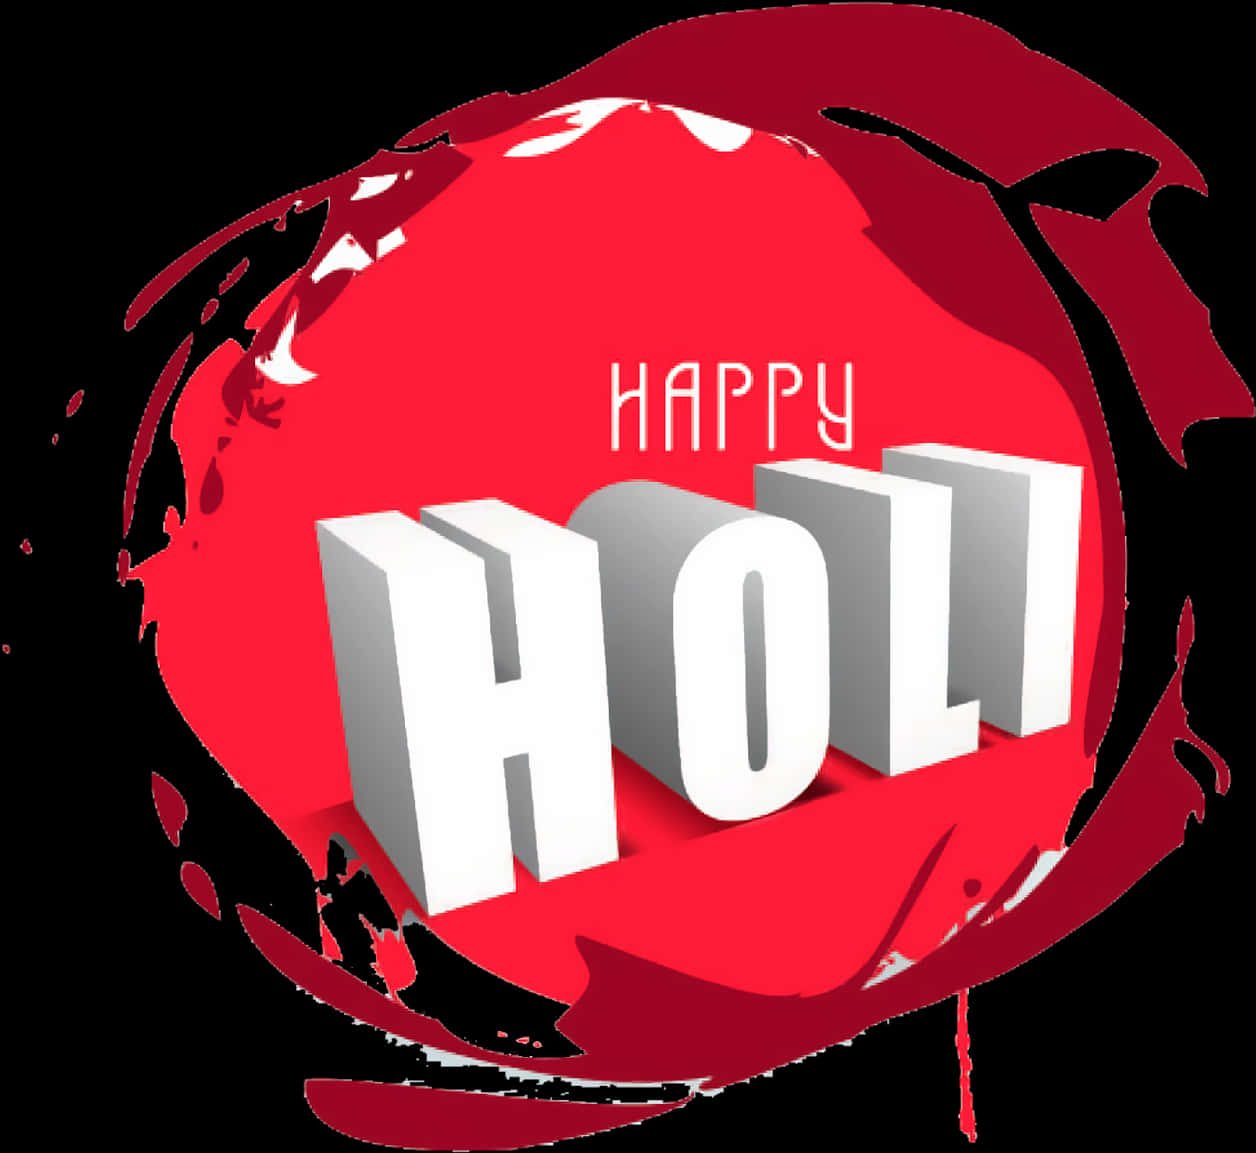 Happy Holi3 D Text Red Splash Background PNG